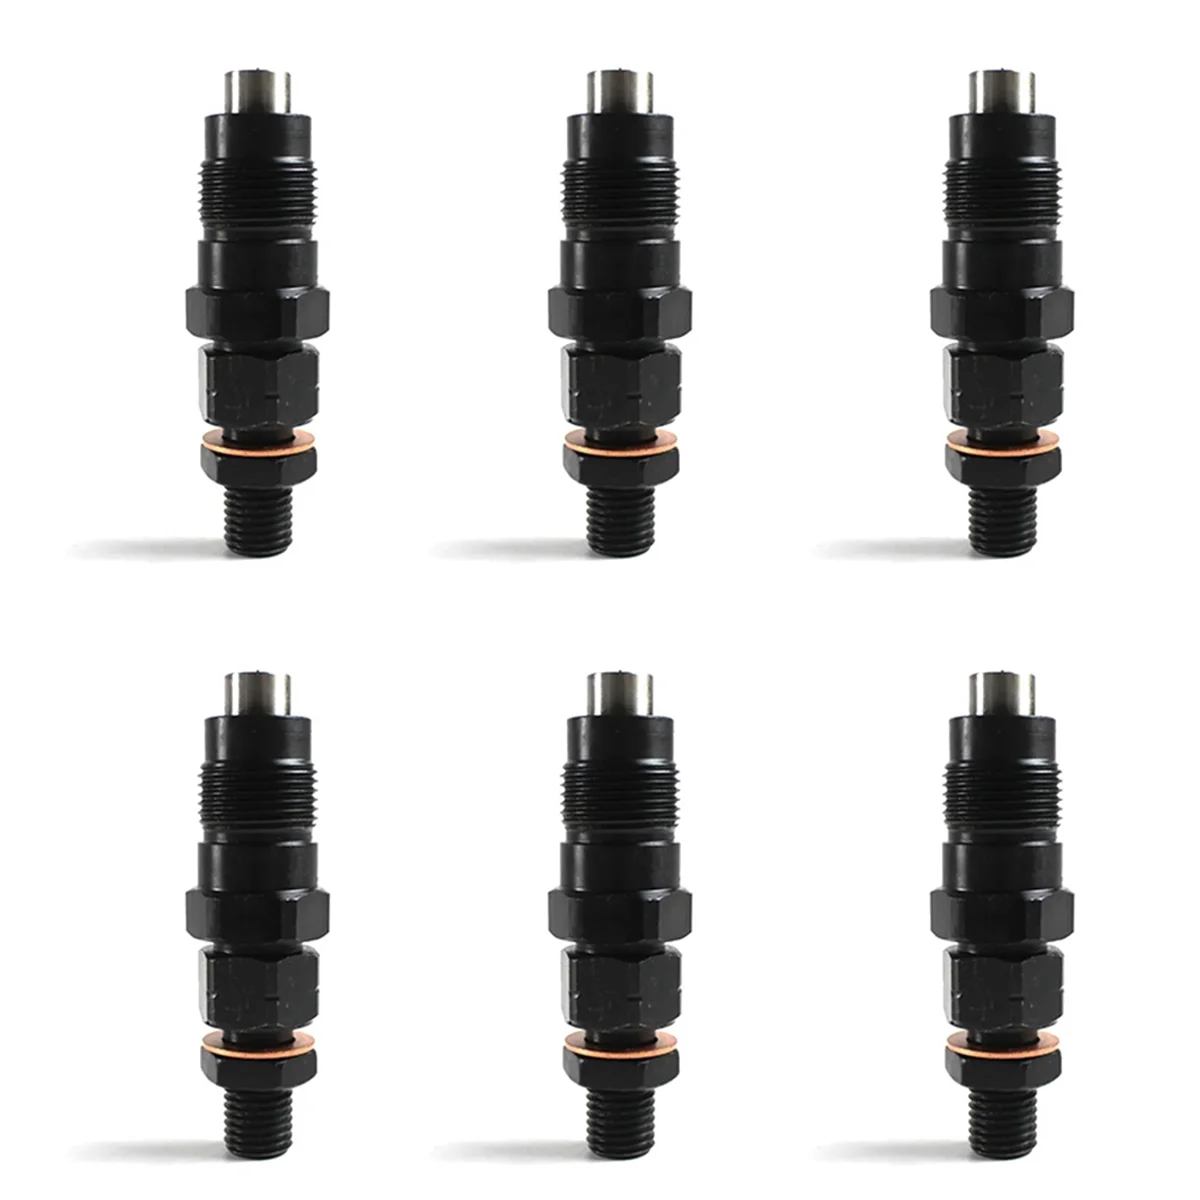 

6PCS 6 Cylinder Fuel Injector 23600-19075 Fit for Toyota Land Cruiser HZJ105 1998-2007 Engine Injector Nozzles